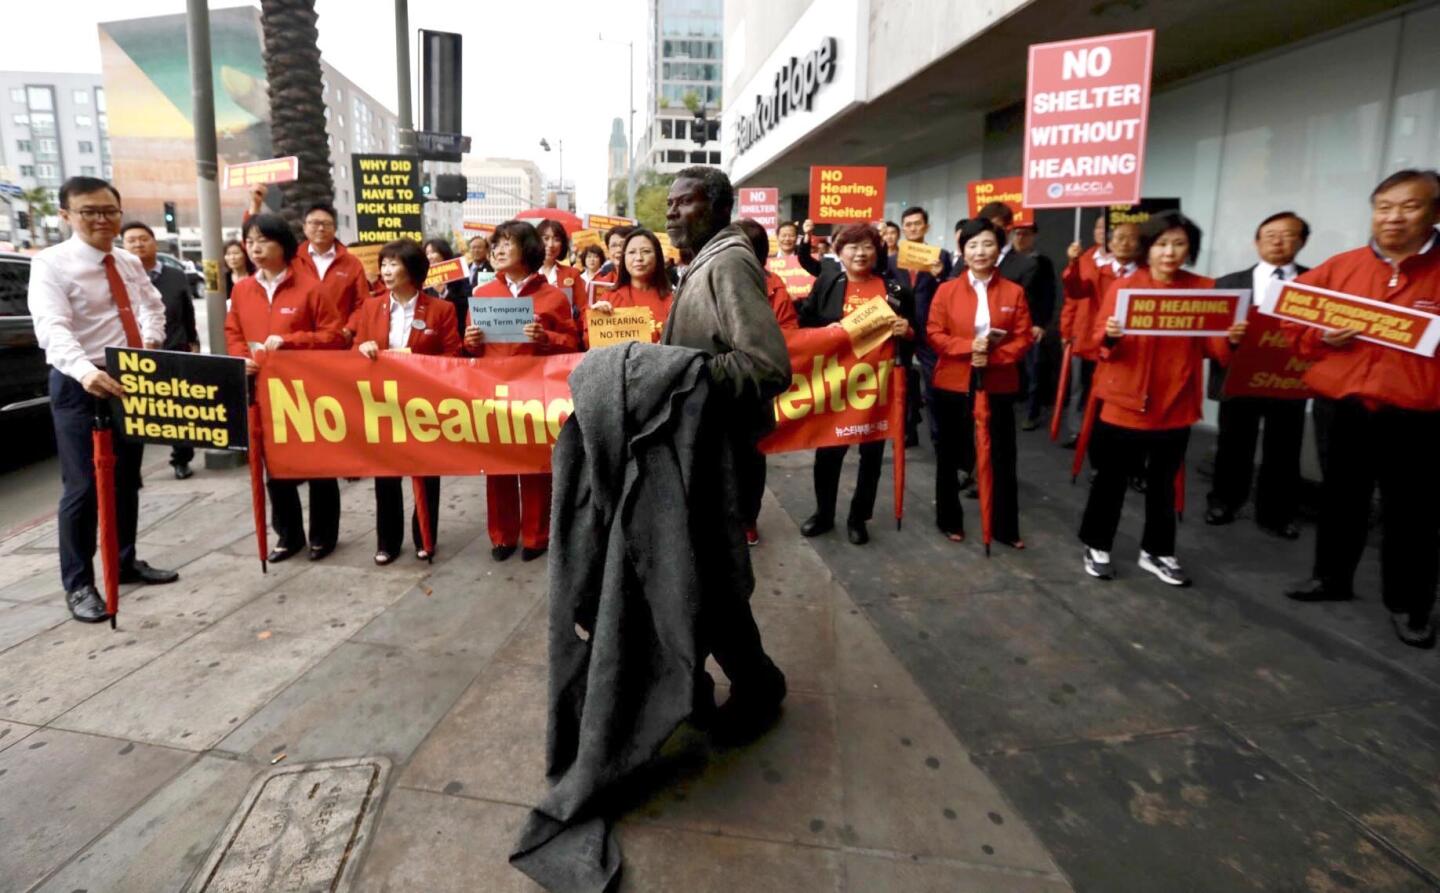 A homeless man stands in front of protesters who are marching against a planned temporary homeless shelter in Koreatown at Wilshire Boulevard and Vermont Avenue.